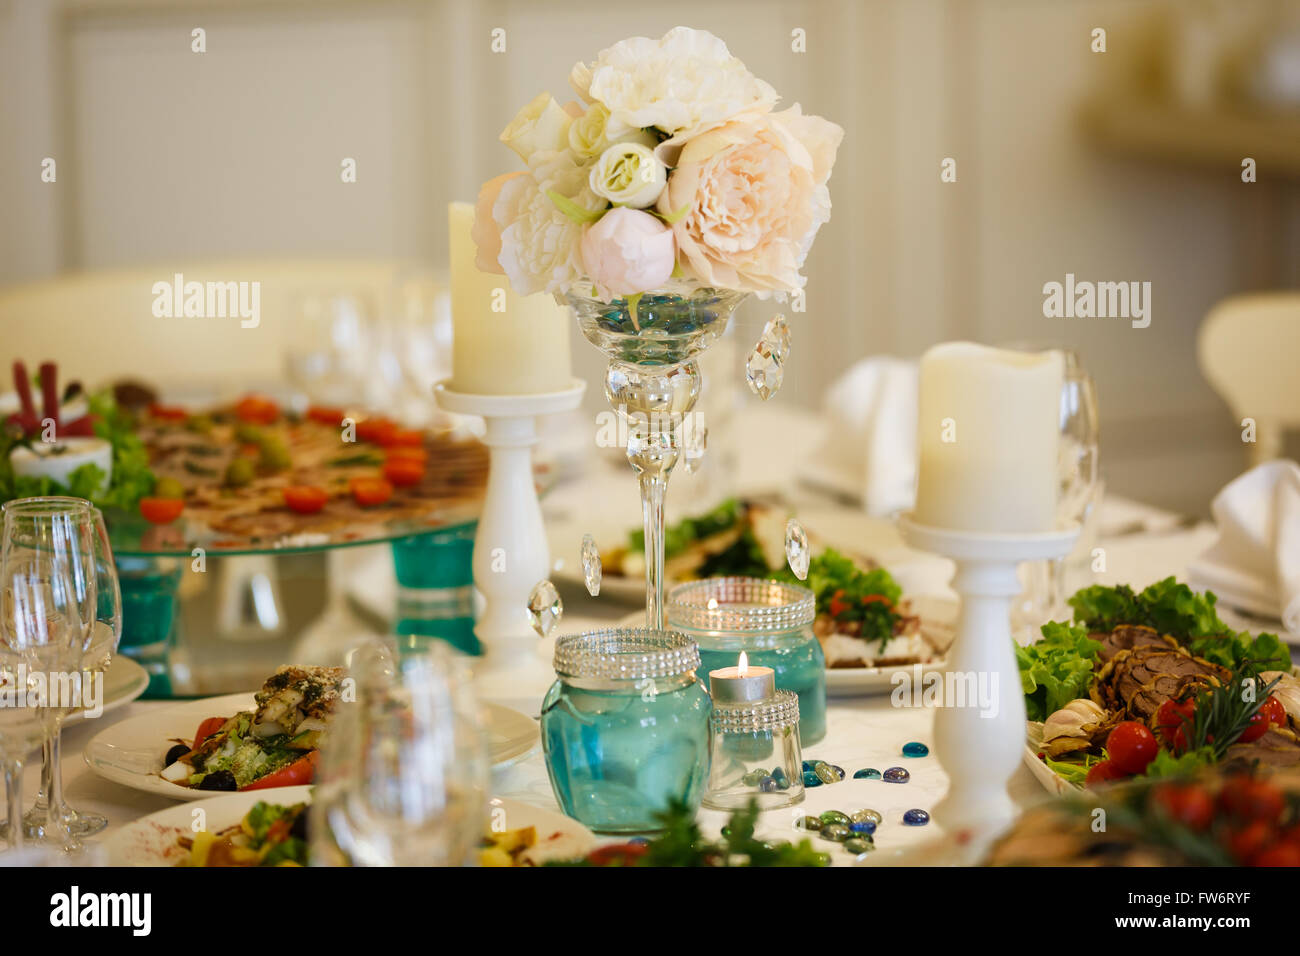 The banquet table with restaurant serving before a wedding banquet Stock Photo